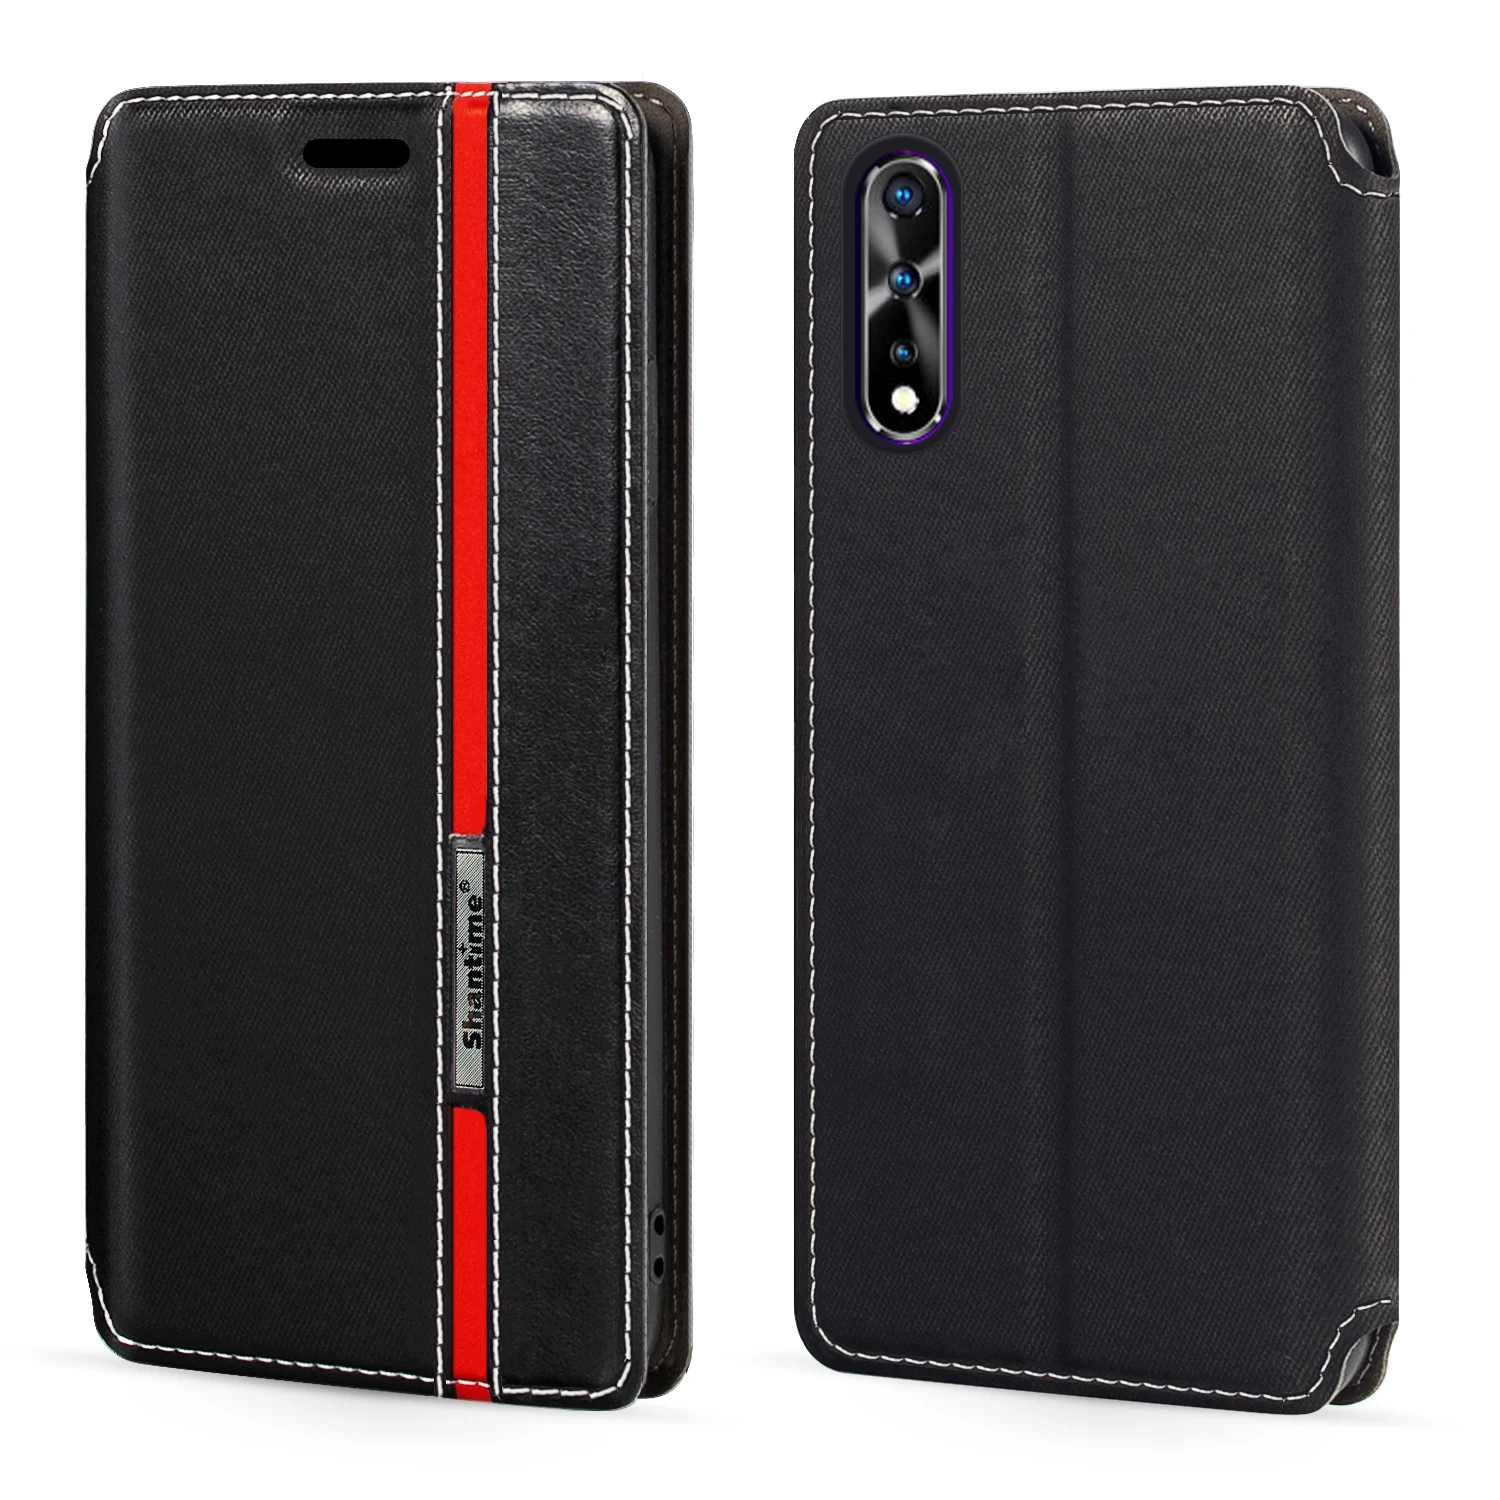 

For Vivo iQOO Neo V17 Neo Case Fashion Multicolor Magnetic Closure Leather Flip Case Cover with Card Holder For Vivo Y7S Z5 S1